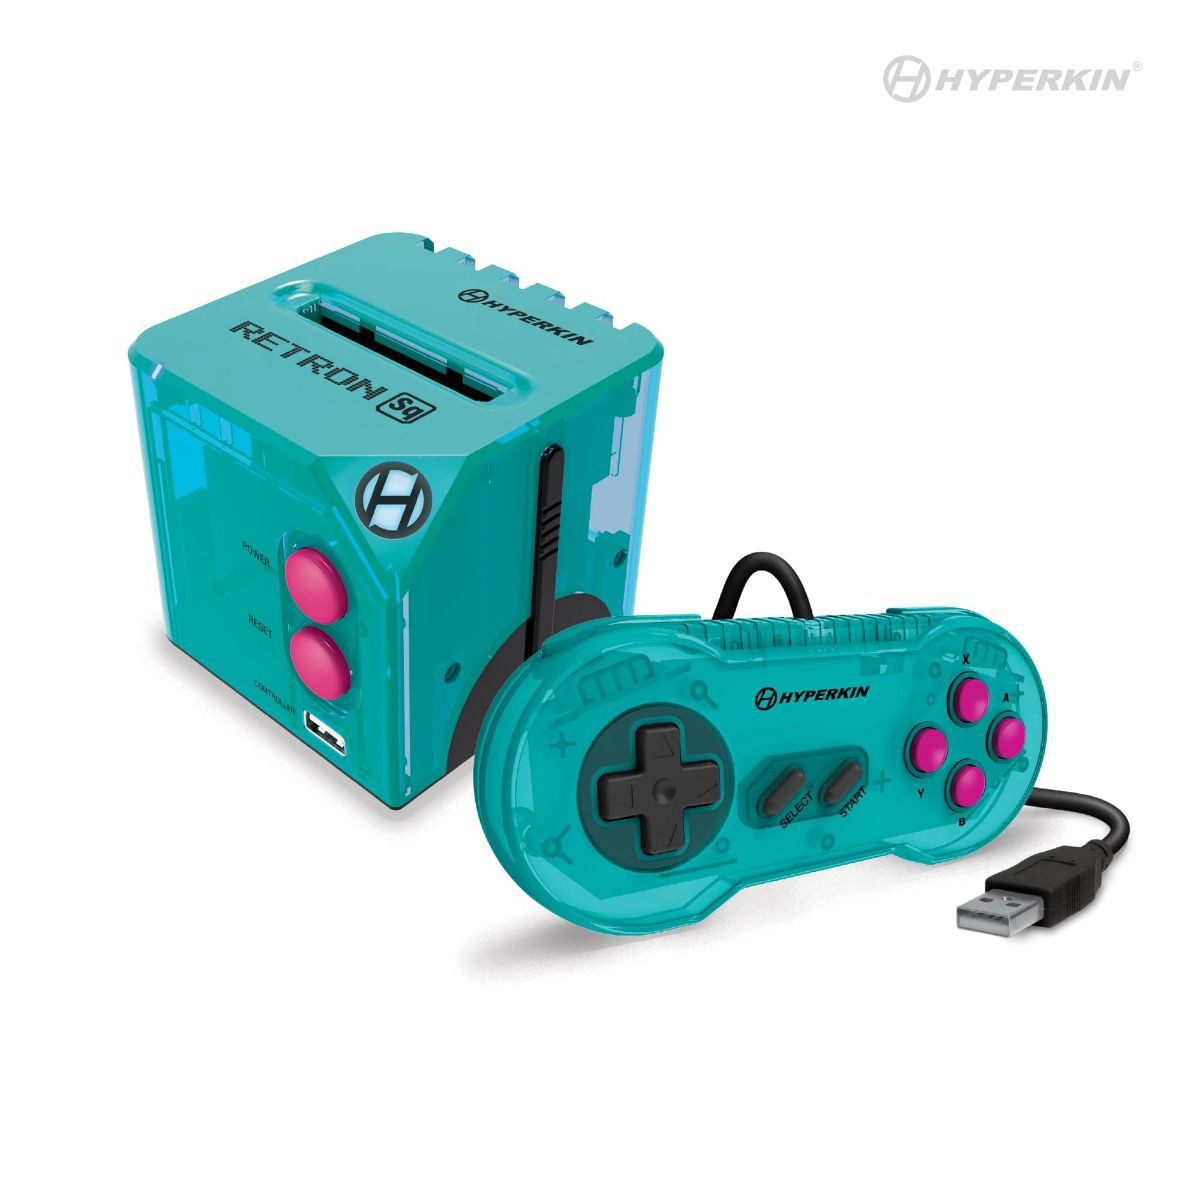 RetroN Sq Gaming Console (HDMI) - Blue/Pink - Gameboy Color Hardware - 2